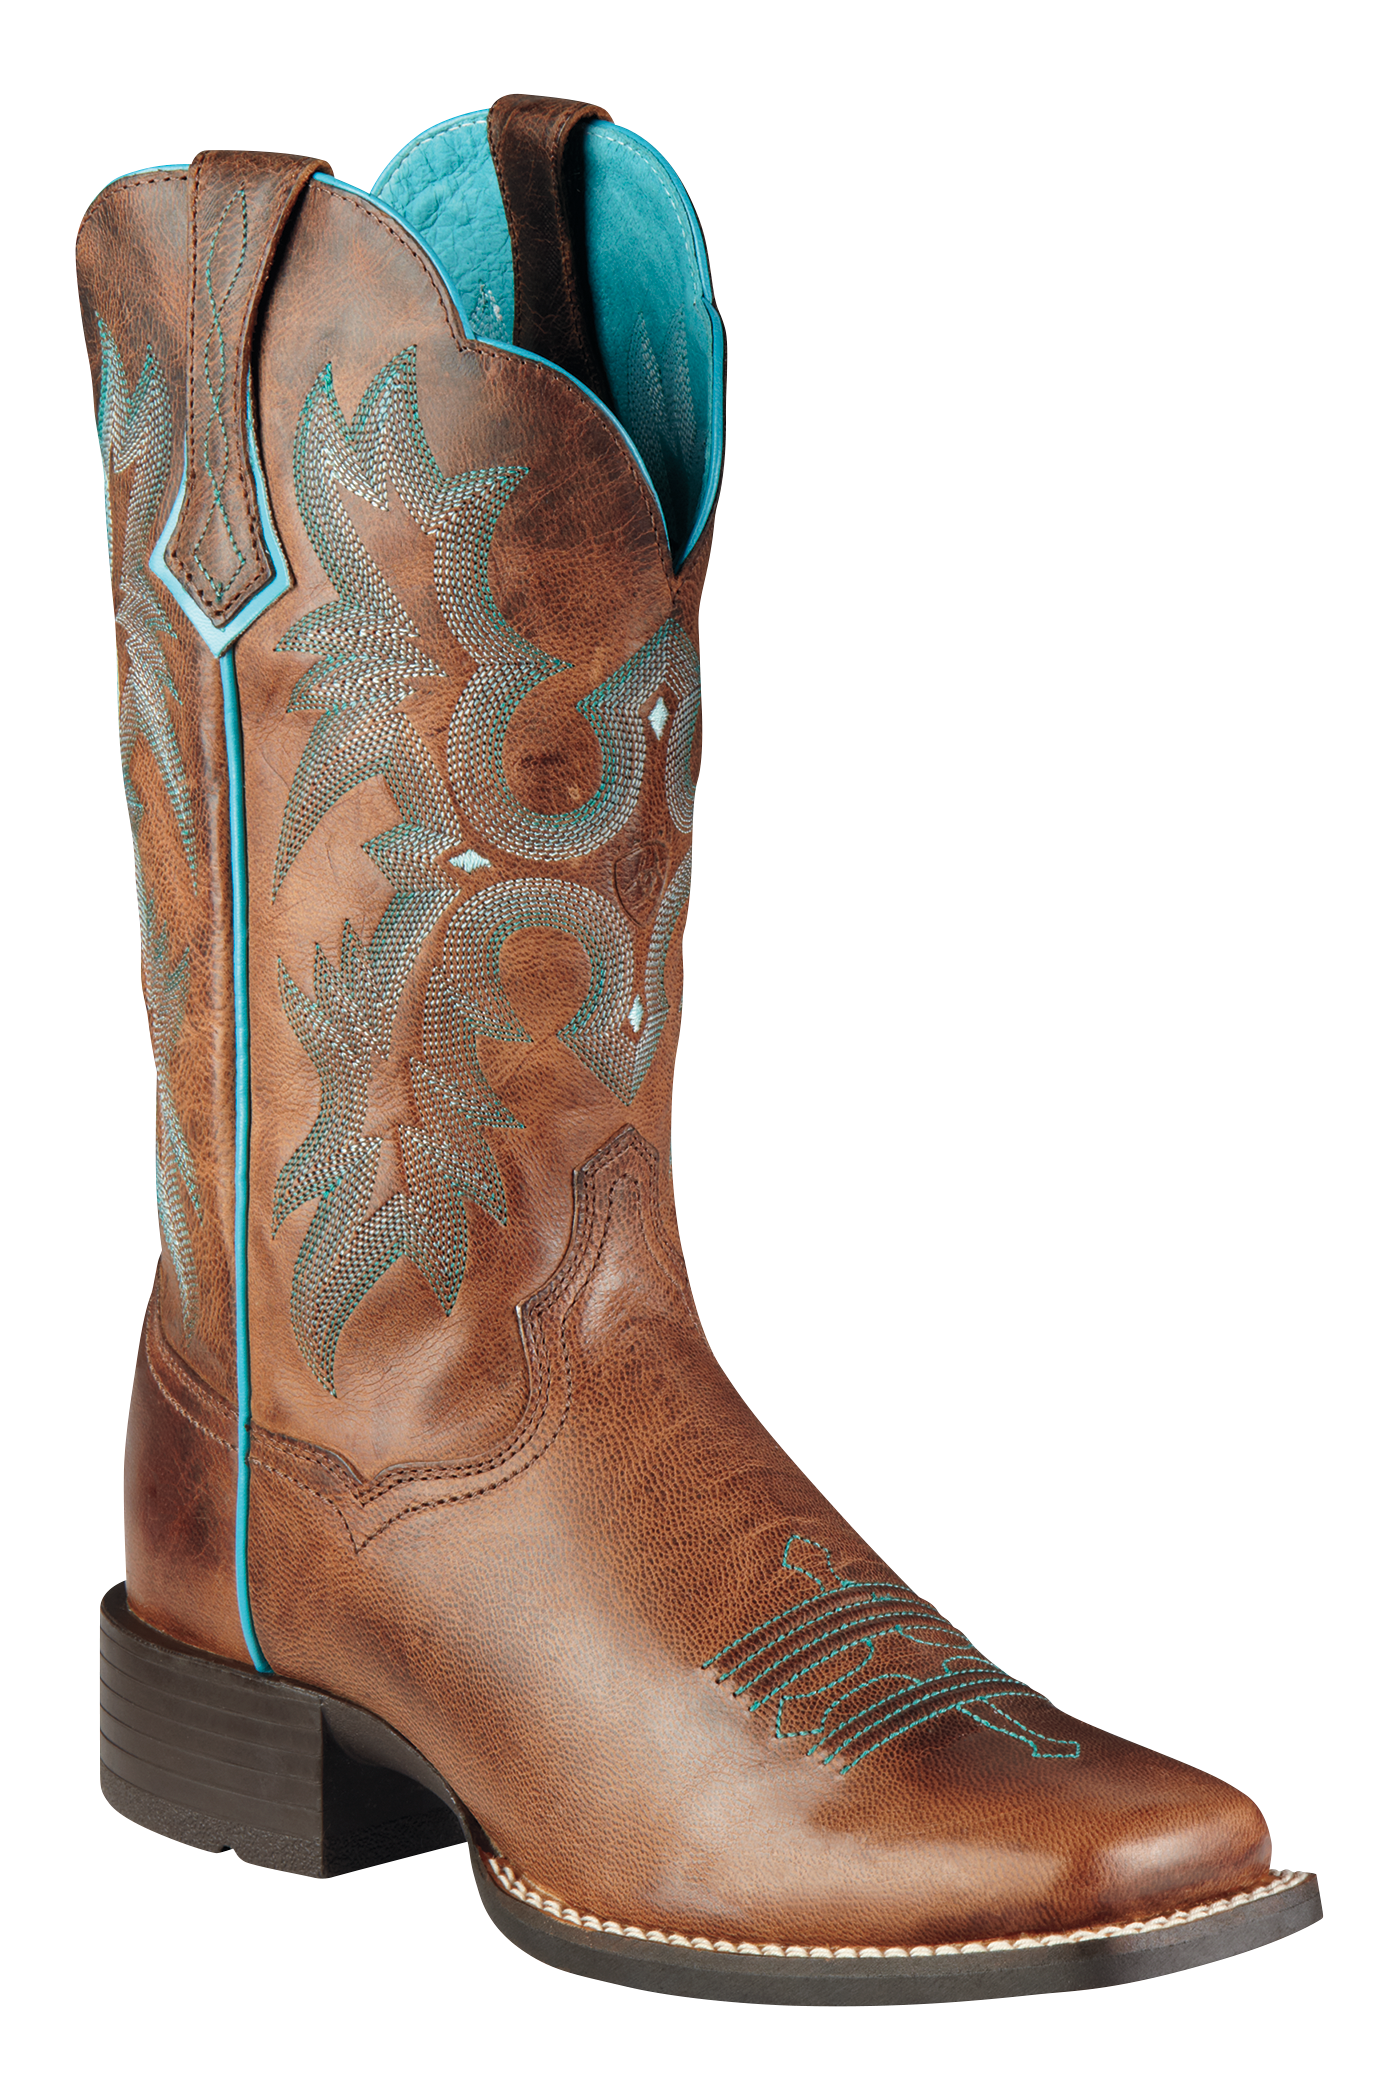 Ariat Tombstone Western Boots for Ladies